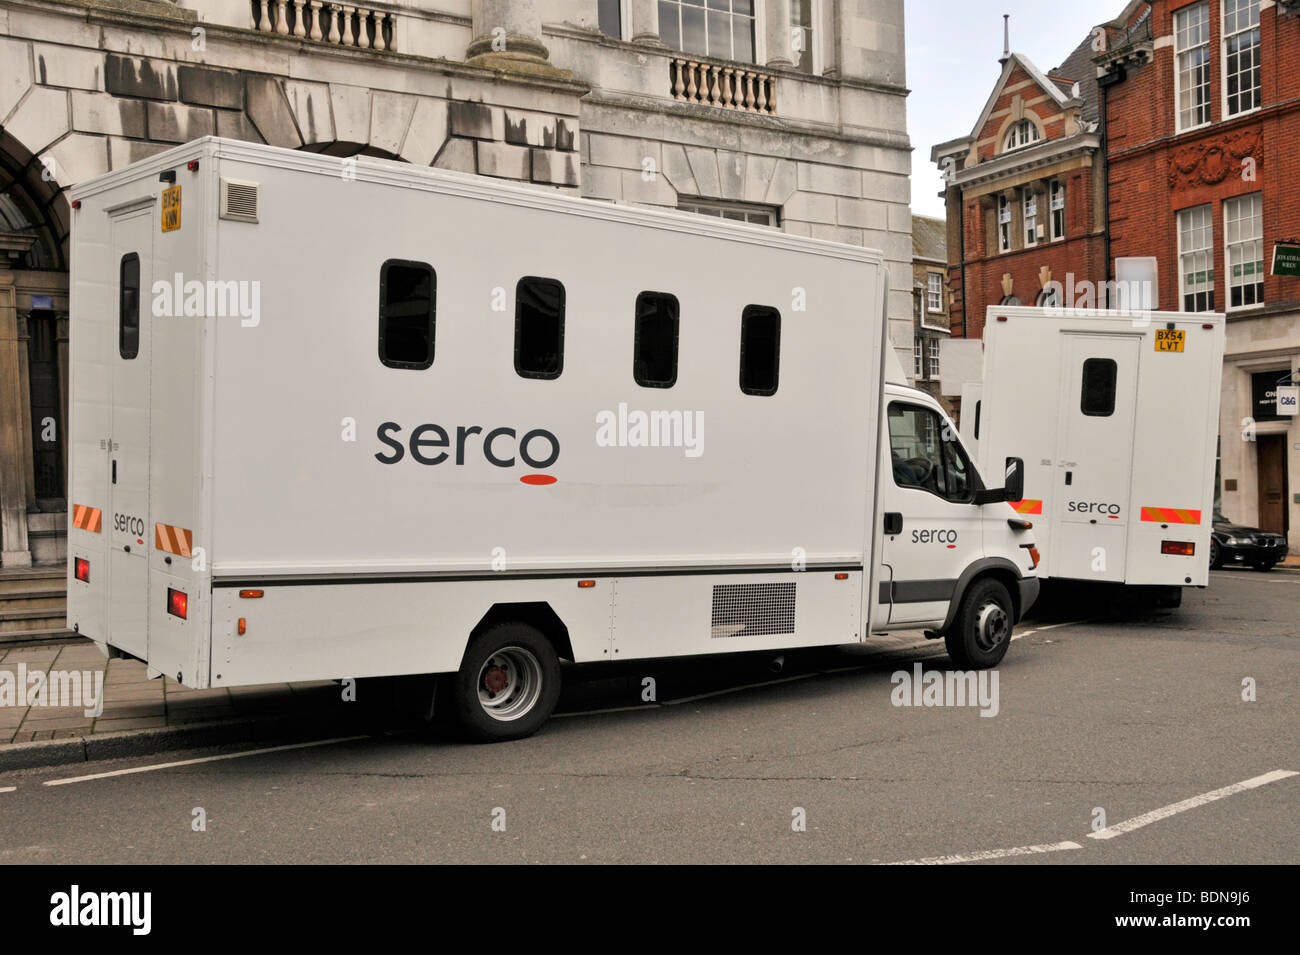 Serco prison vans parked on pavement outside Chelmsford Shire Hall used as Magistrates Court Essex England UK Stock Photo